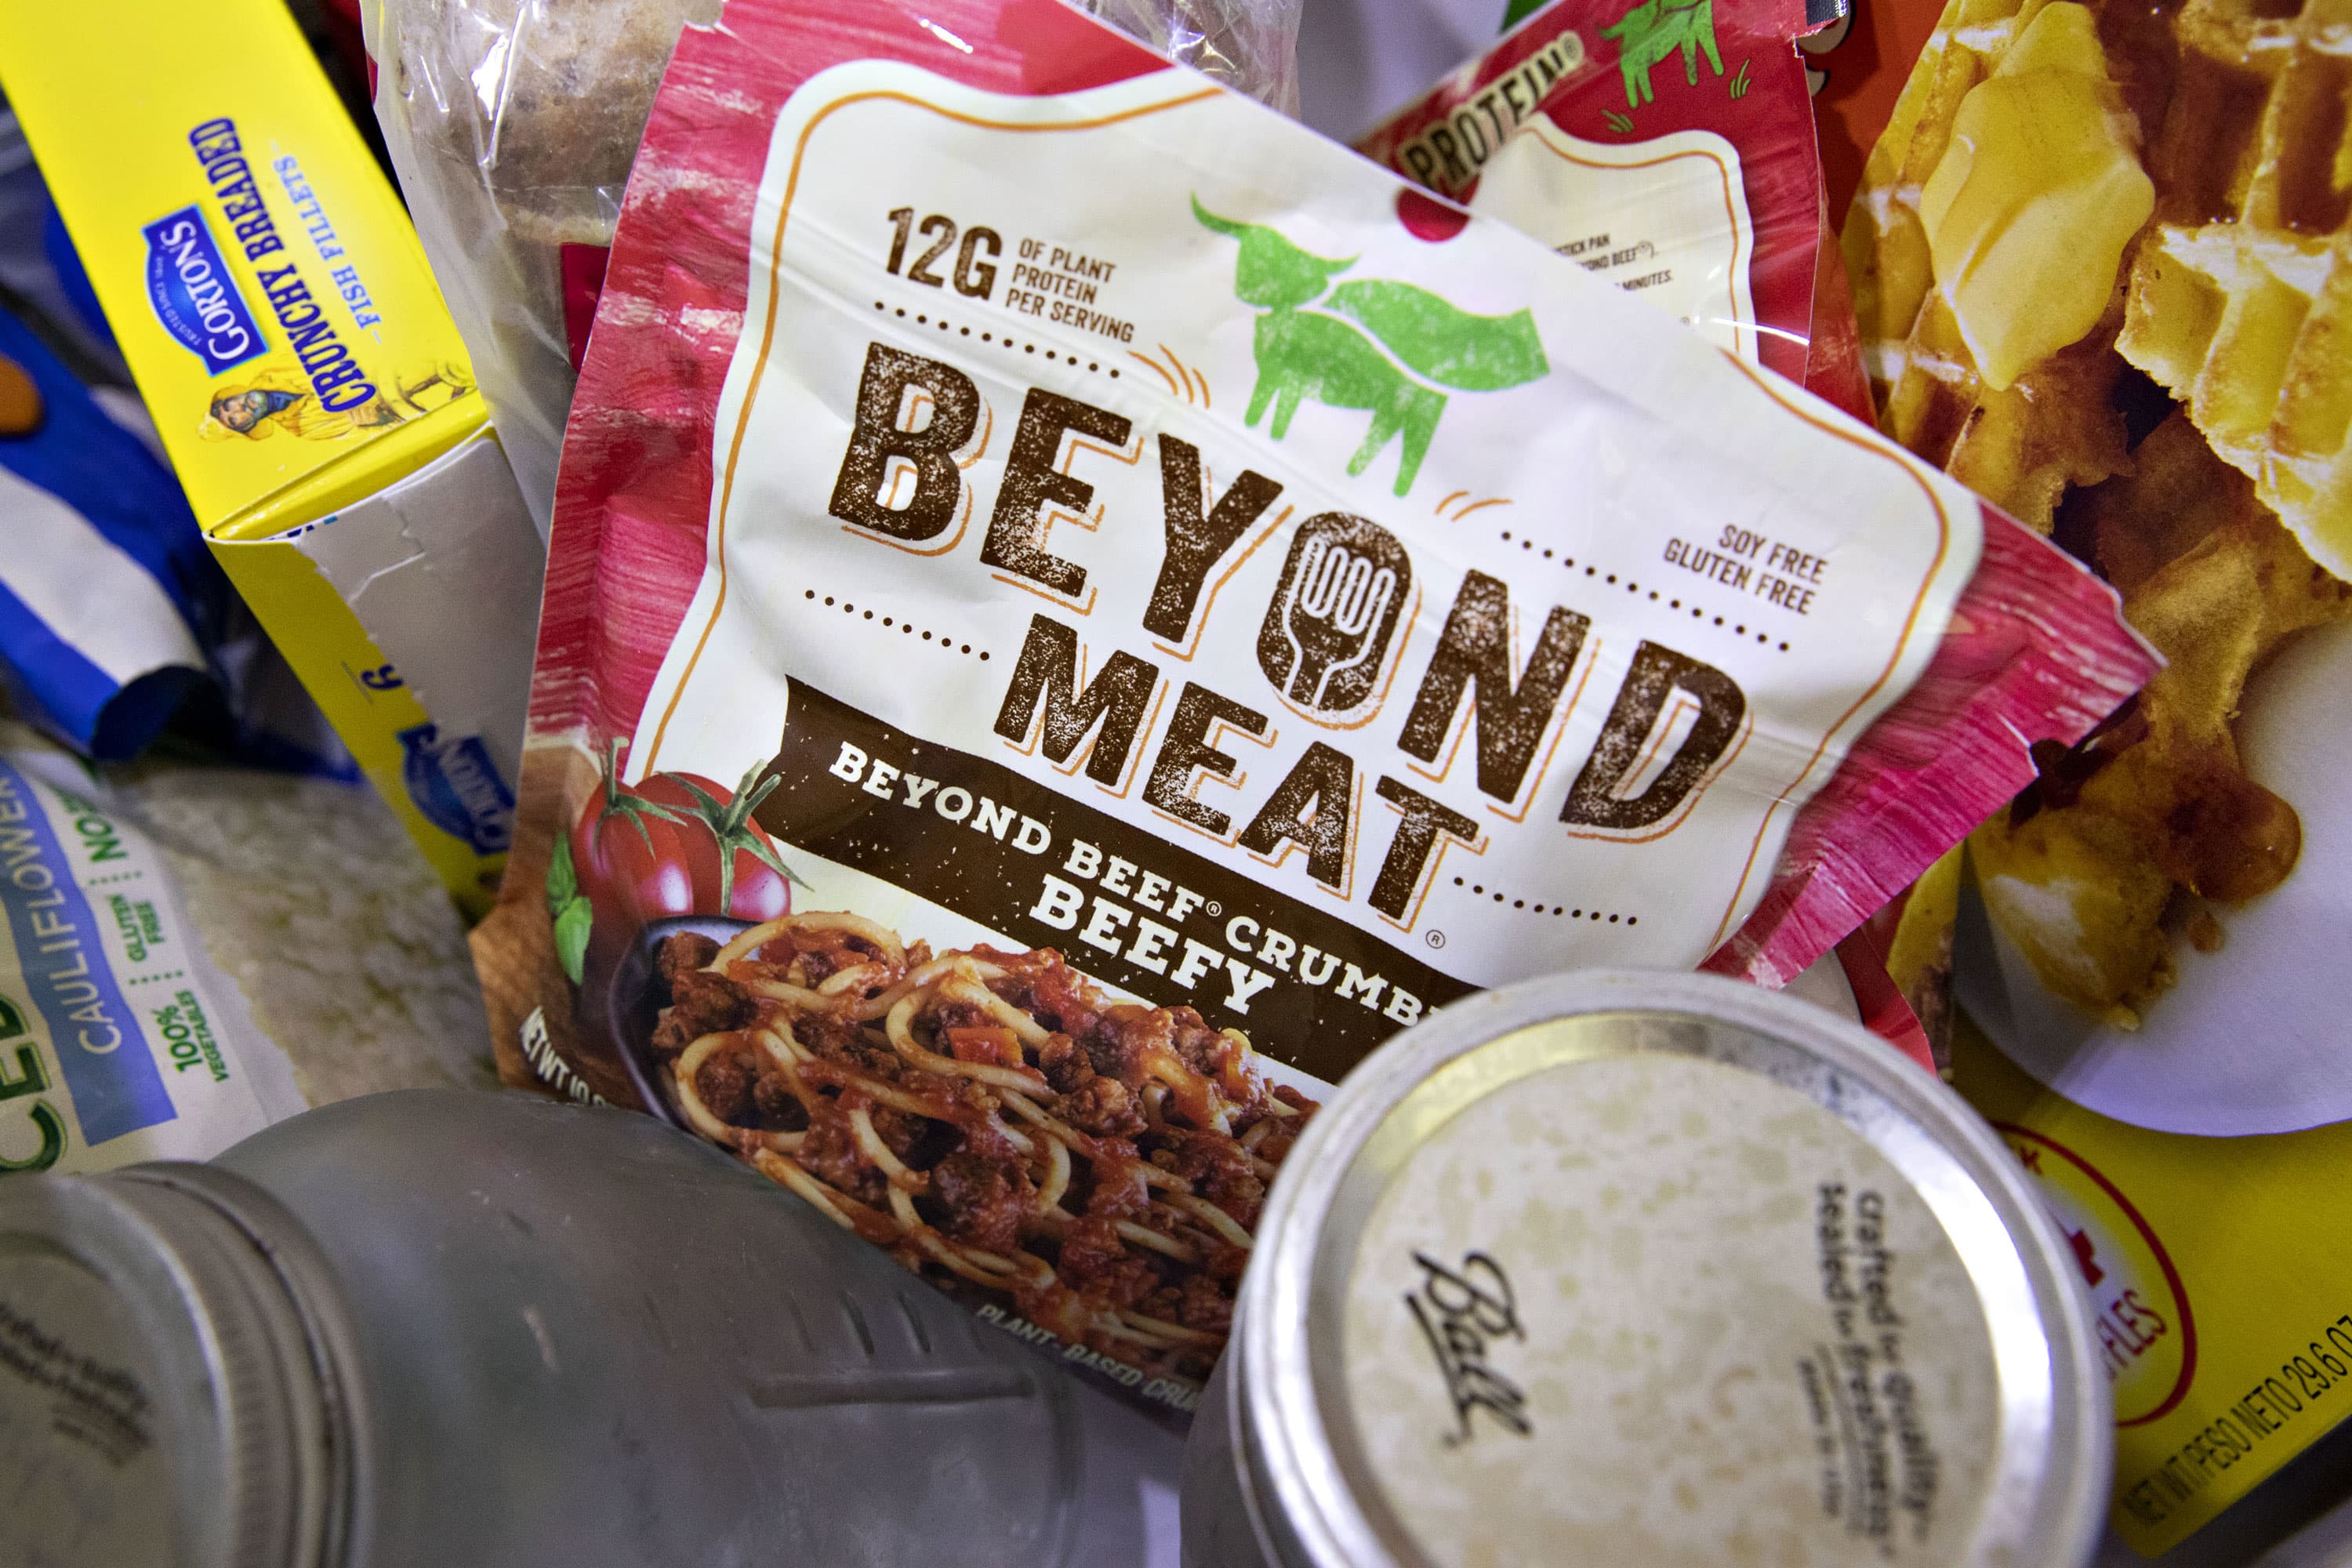 Beyond Meat stock tumbles 17% as analysts worry about the company’s long-term growth – CNBC